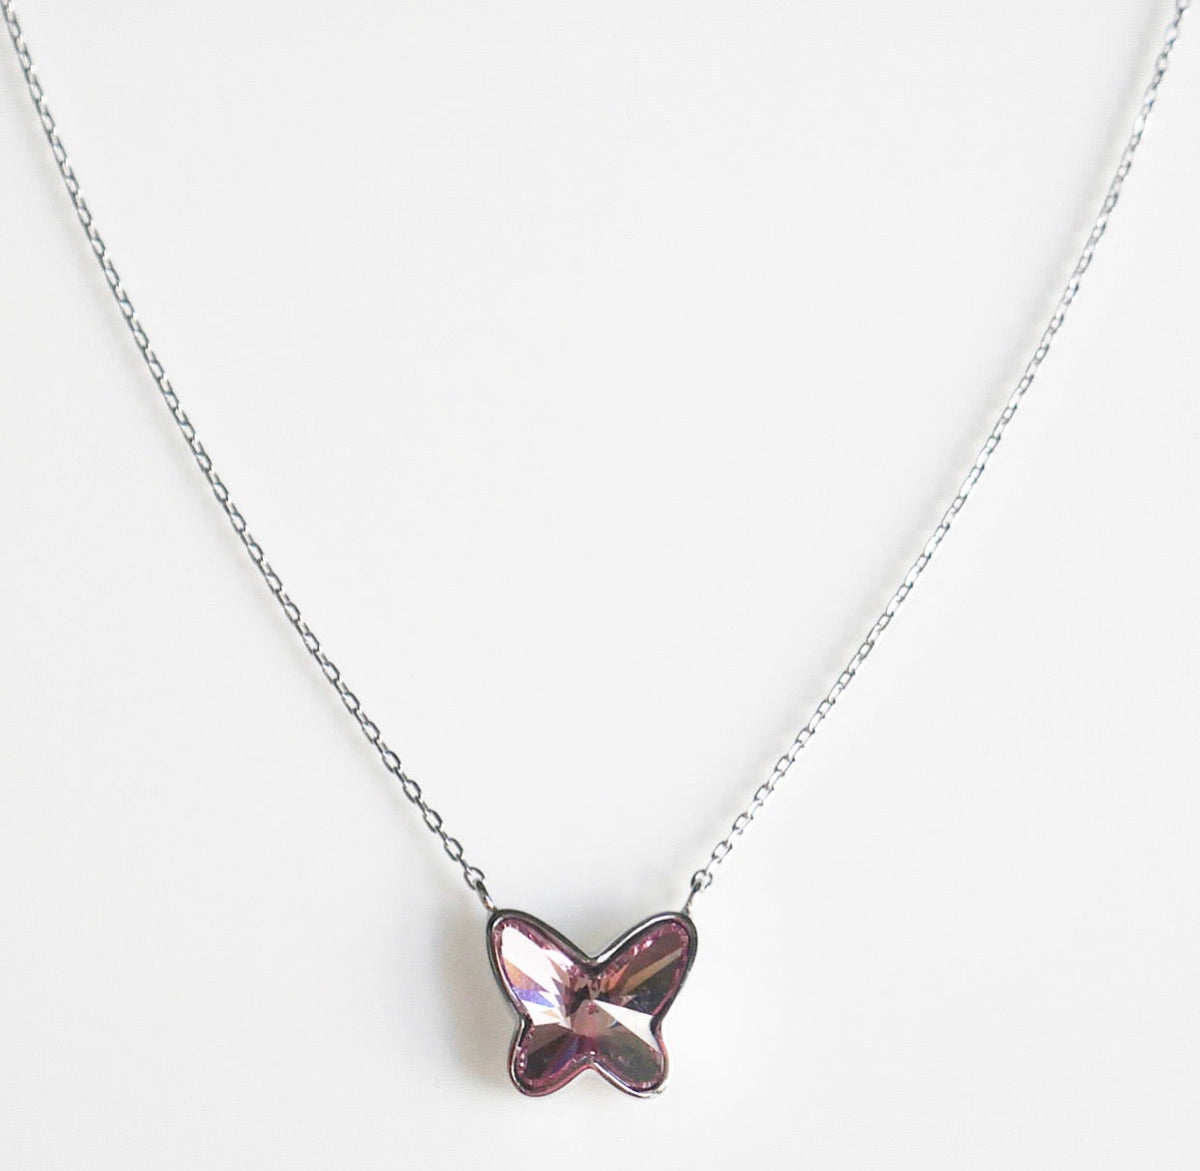 necklaces, butterfly necklaces, pink butterfly necklaces, pink rhinestone necklaces, swarovski crystal necklaces, australian crystal necklaces, barbie jewelry and accessories , nickel free, waterproof jewelry that wont tarnish or turn green, popular necklaces, .925 stelring silver, dainty jewelry, graduation gift, anniversary gift, best friend necklaces, going out jewelry, tiktok brands 